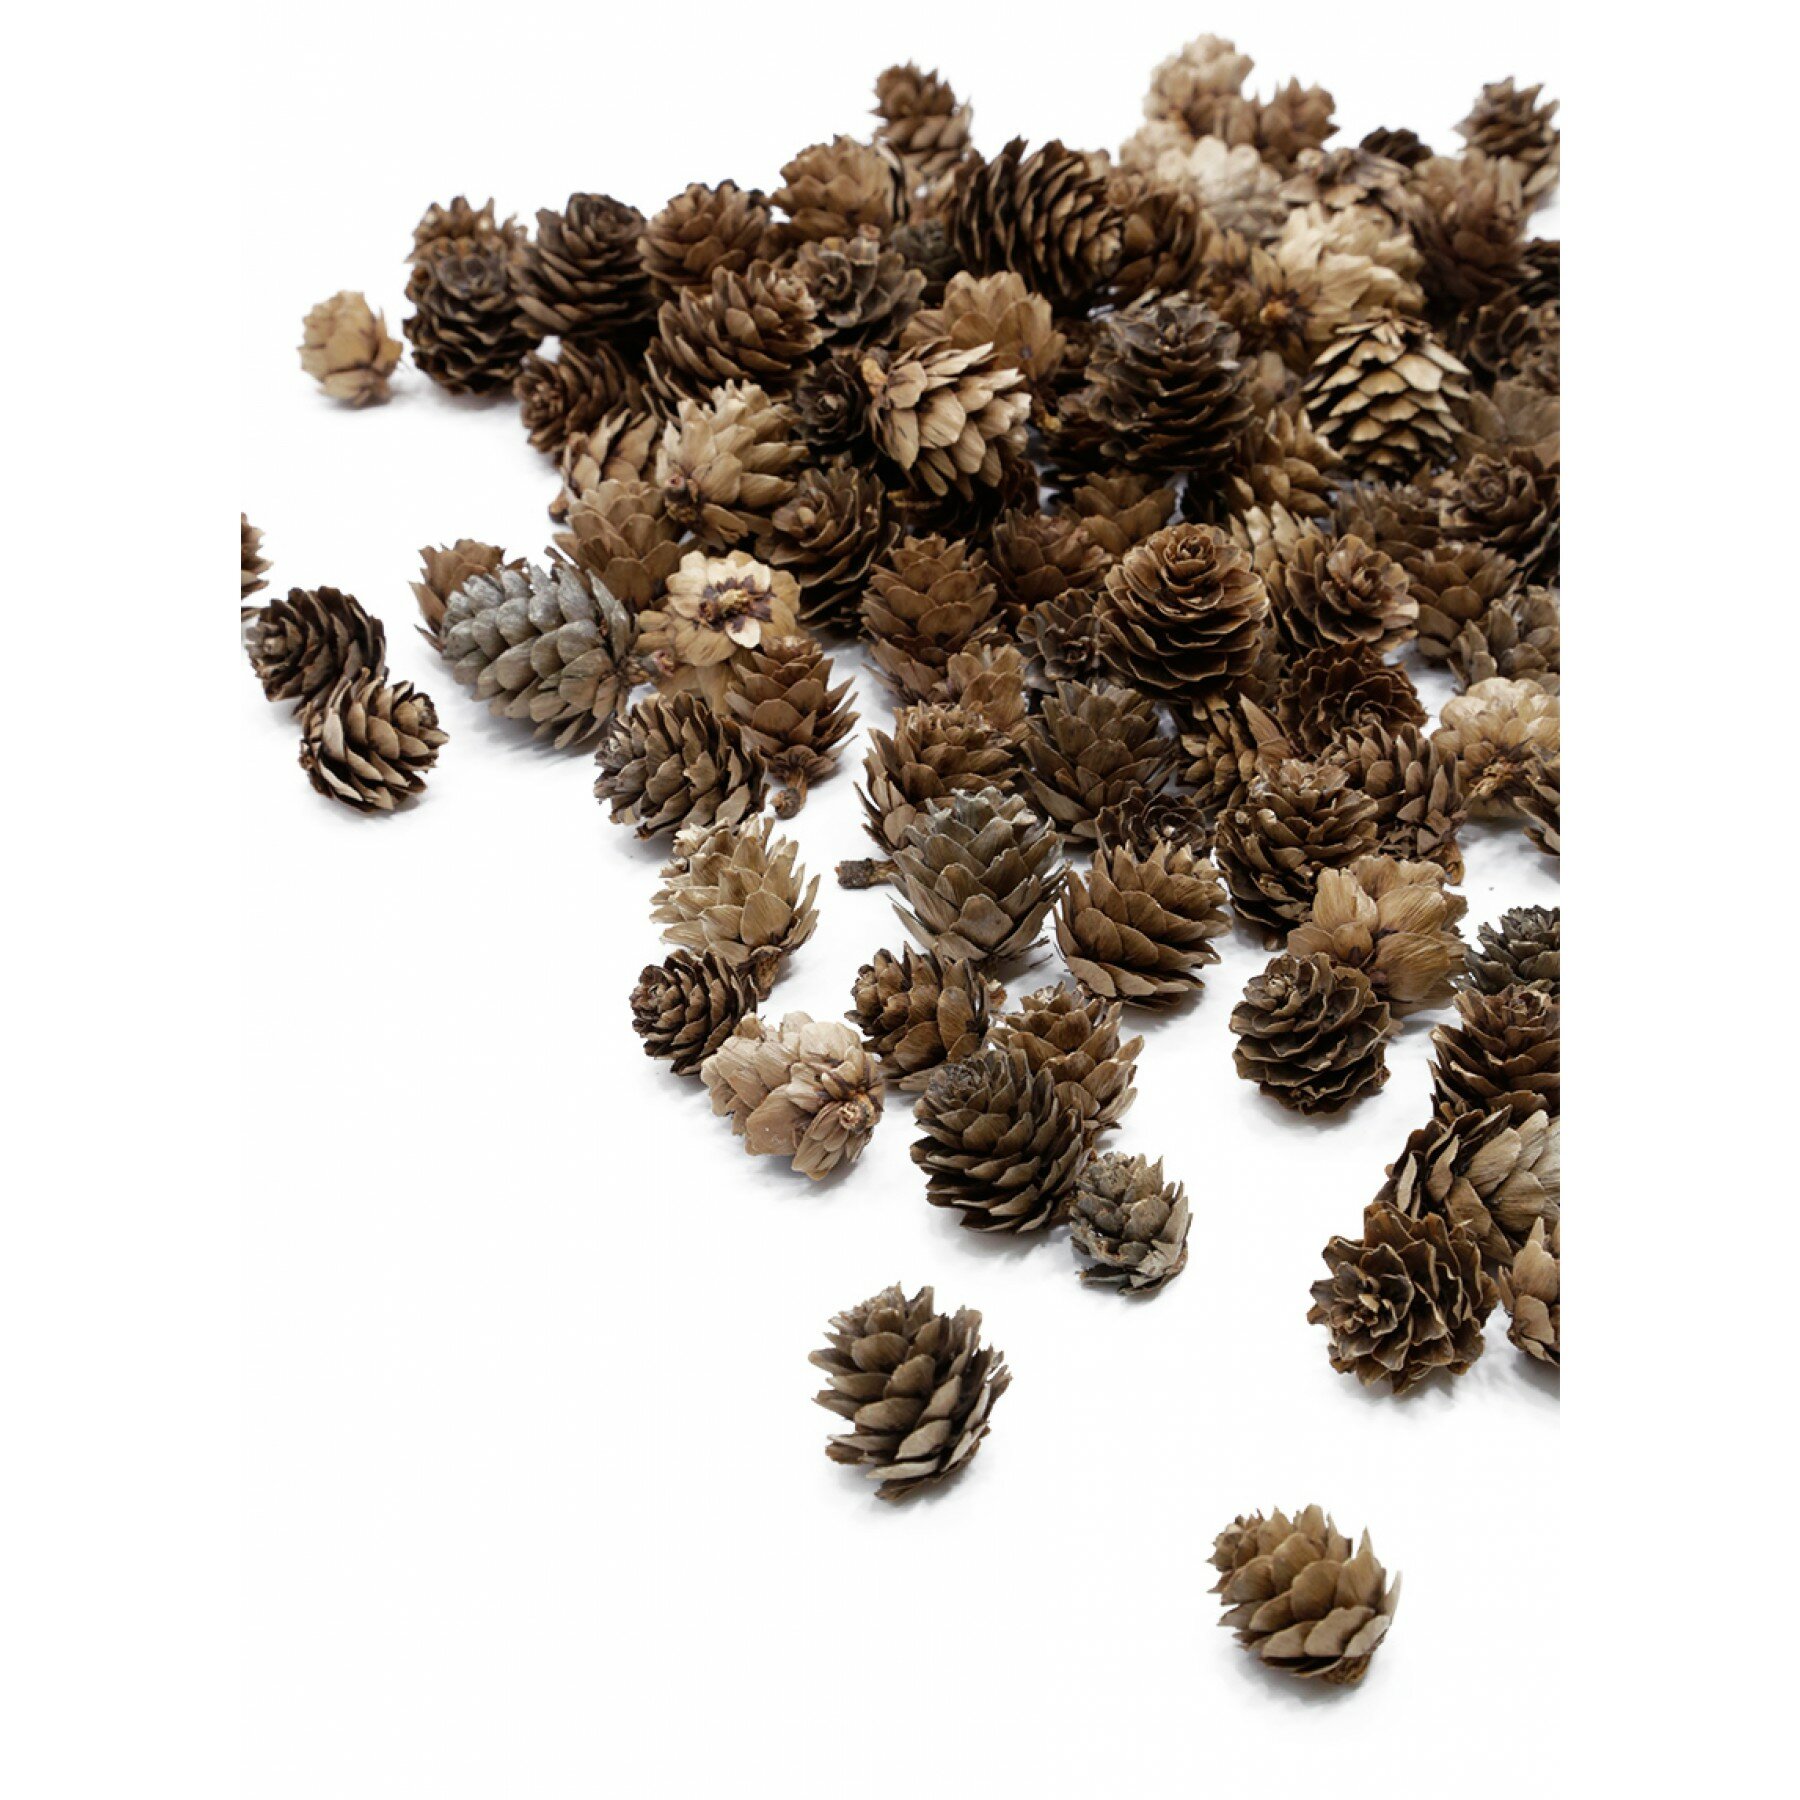 The Holiday Aisle® Decorative Natural Miniature Pine Cones Pack & Reviews